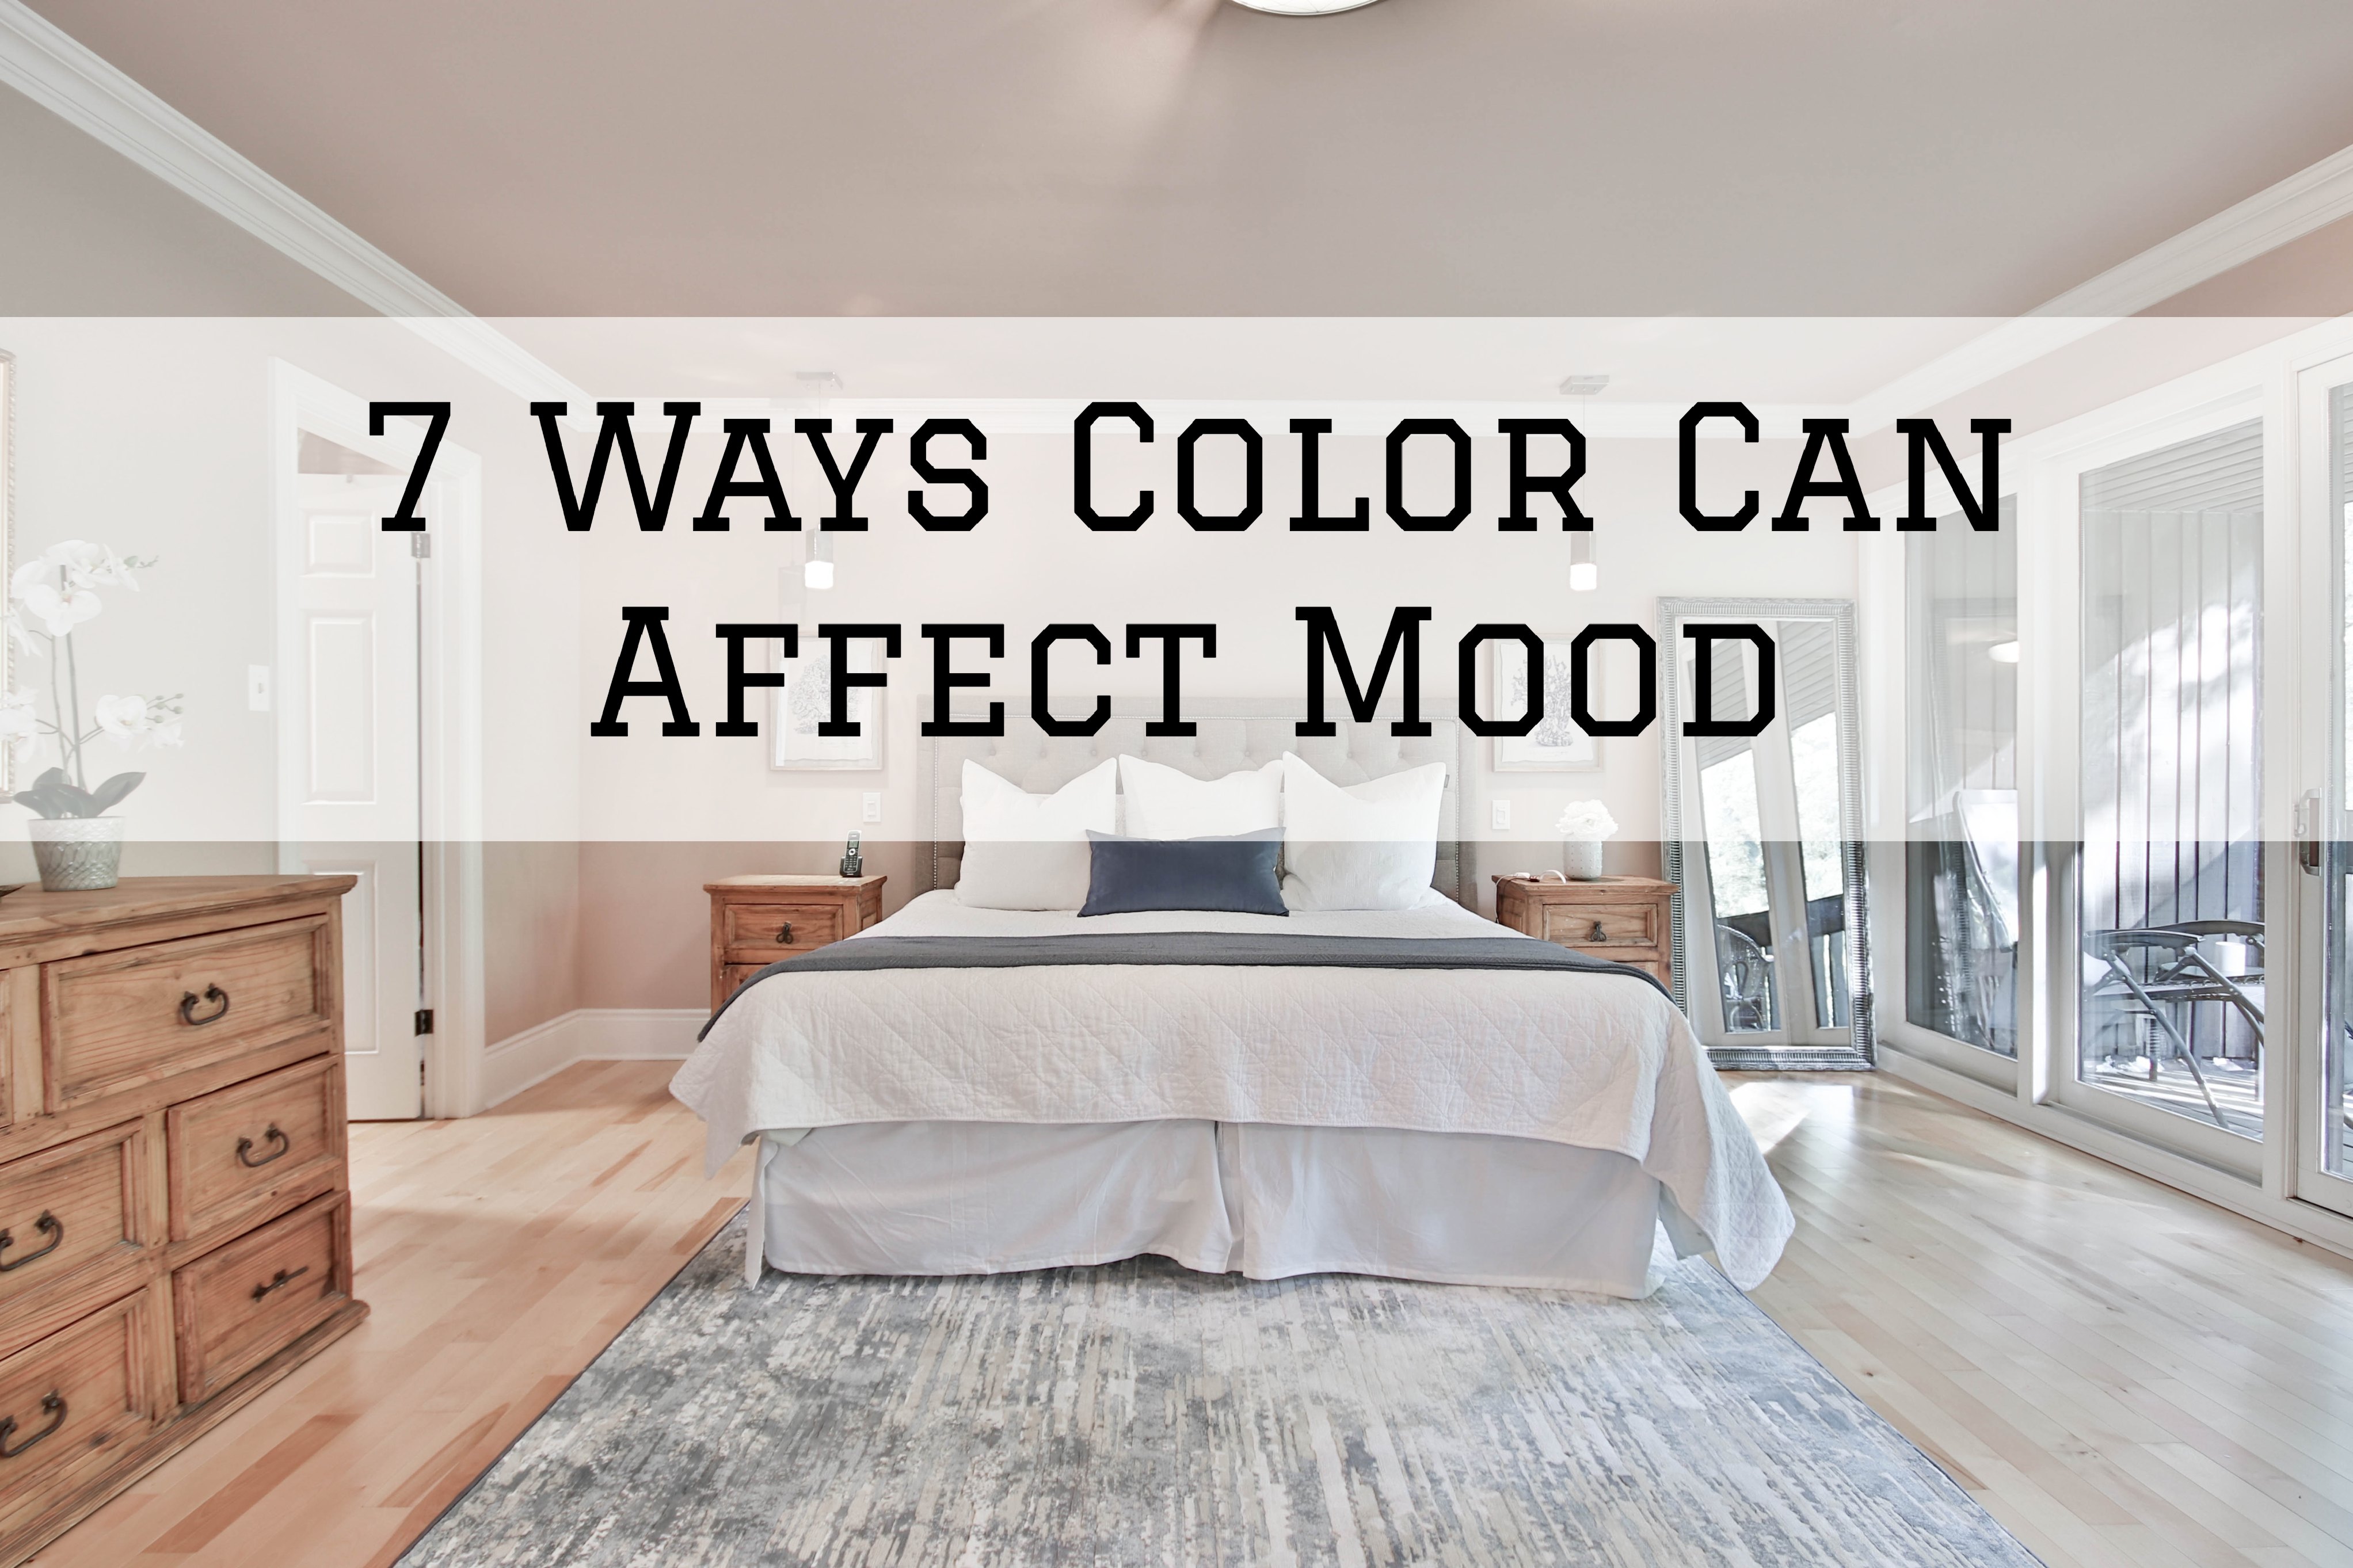 7 Ways Color Can Affect Mood in Ottawa, Ontario